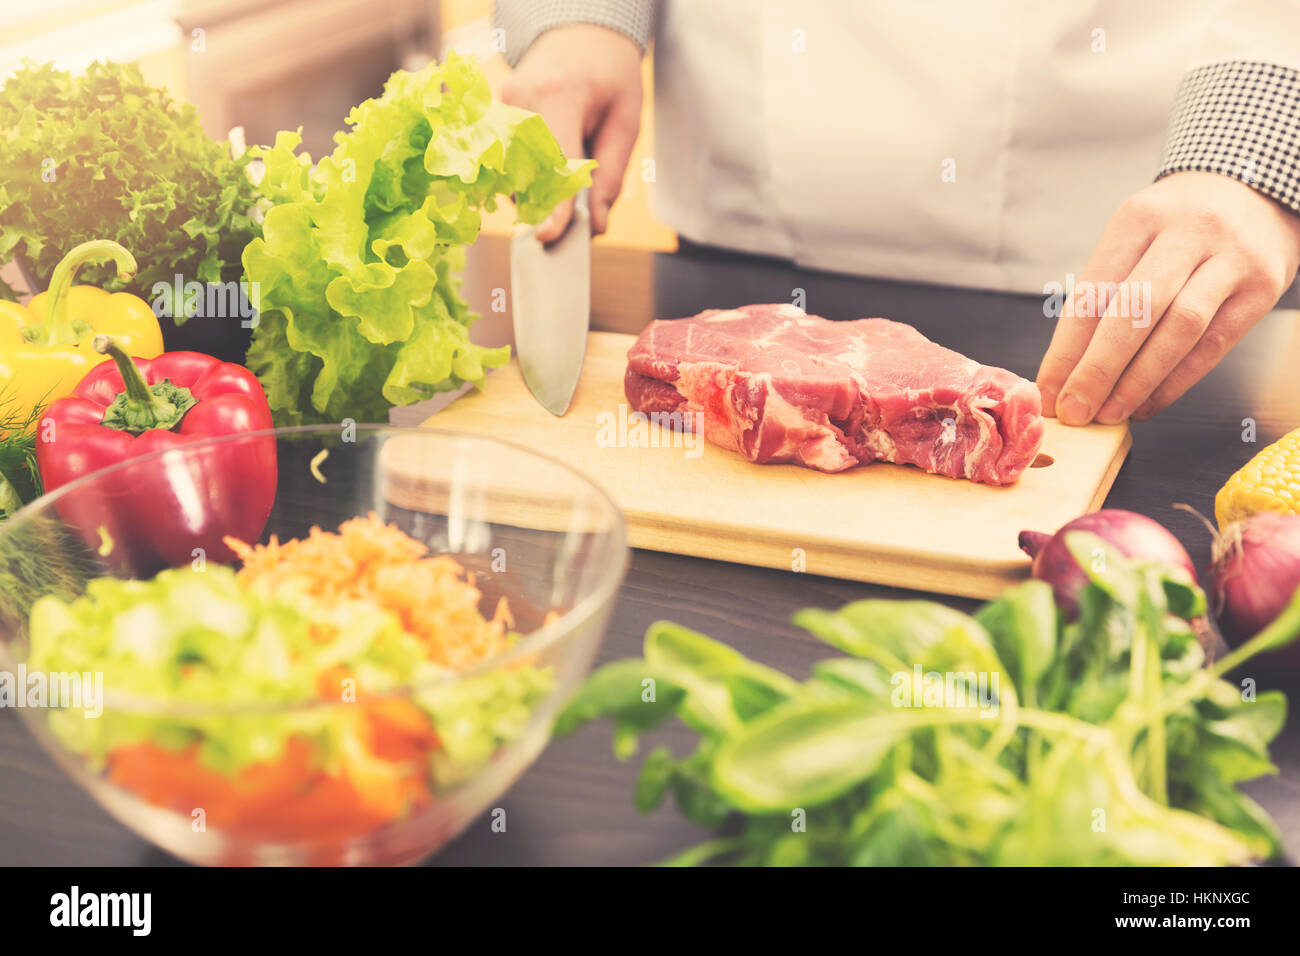 cook is ready for raw meat preparation Stock Photo